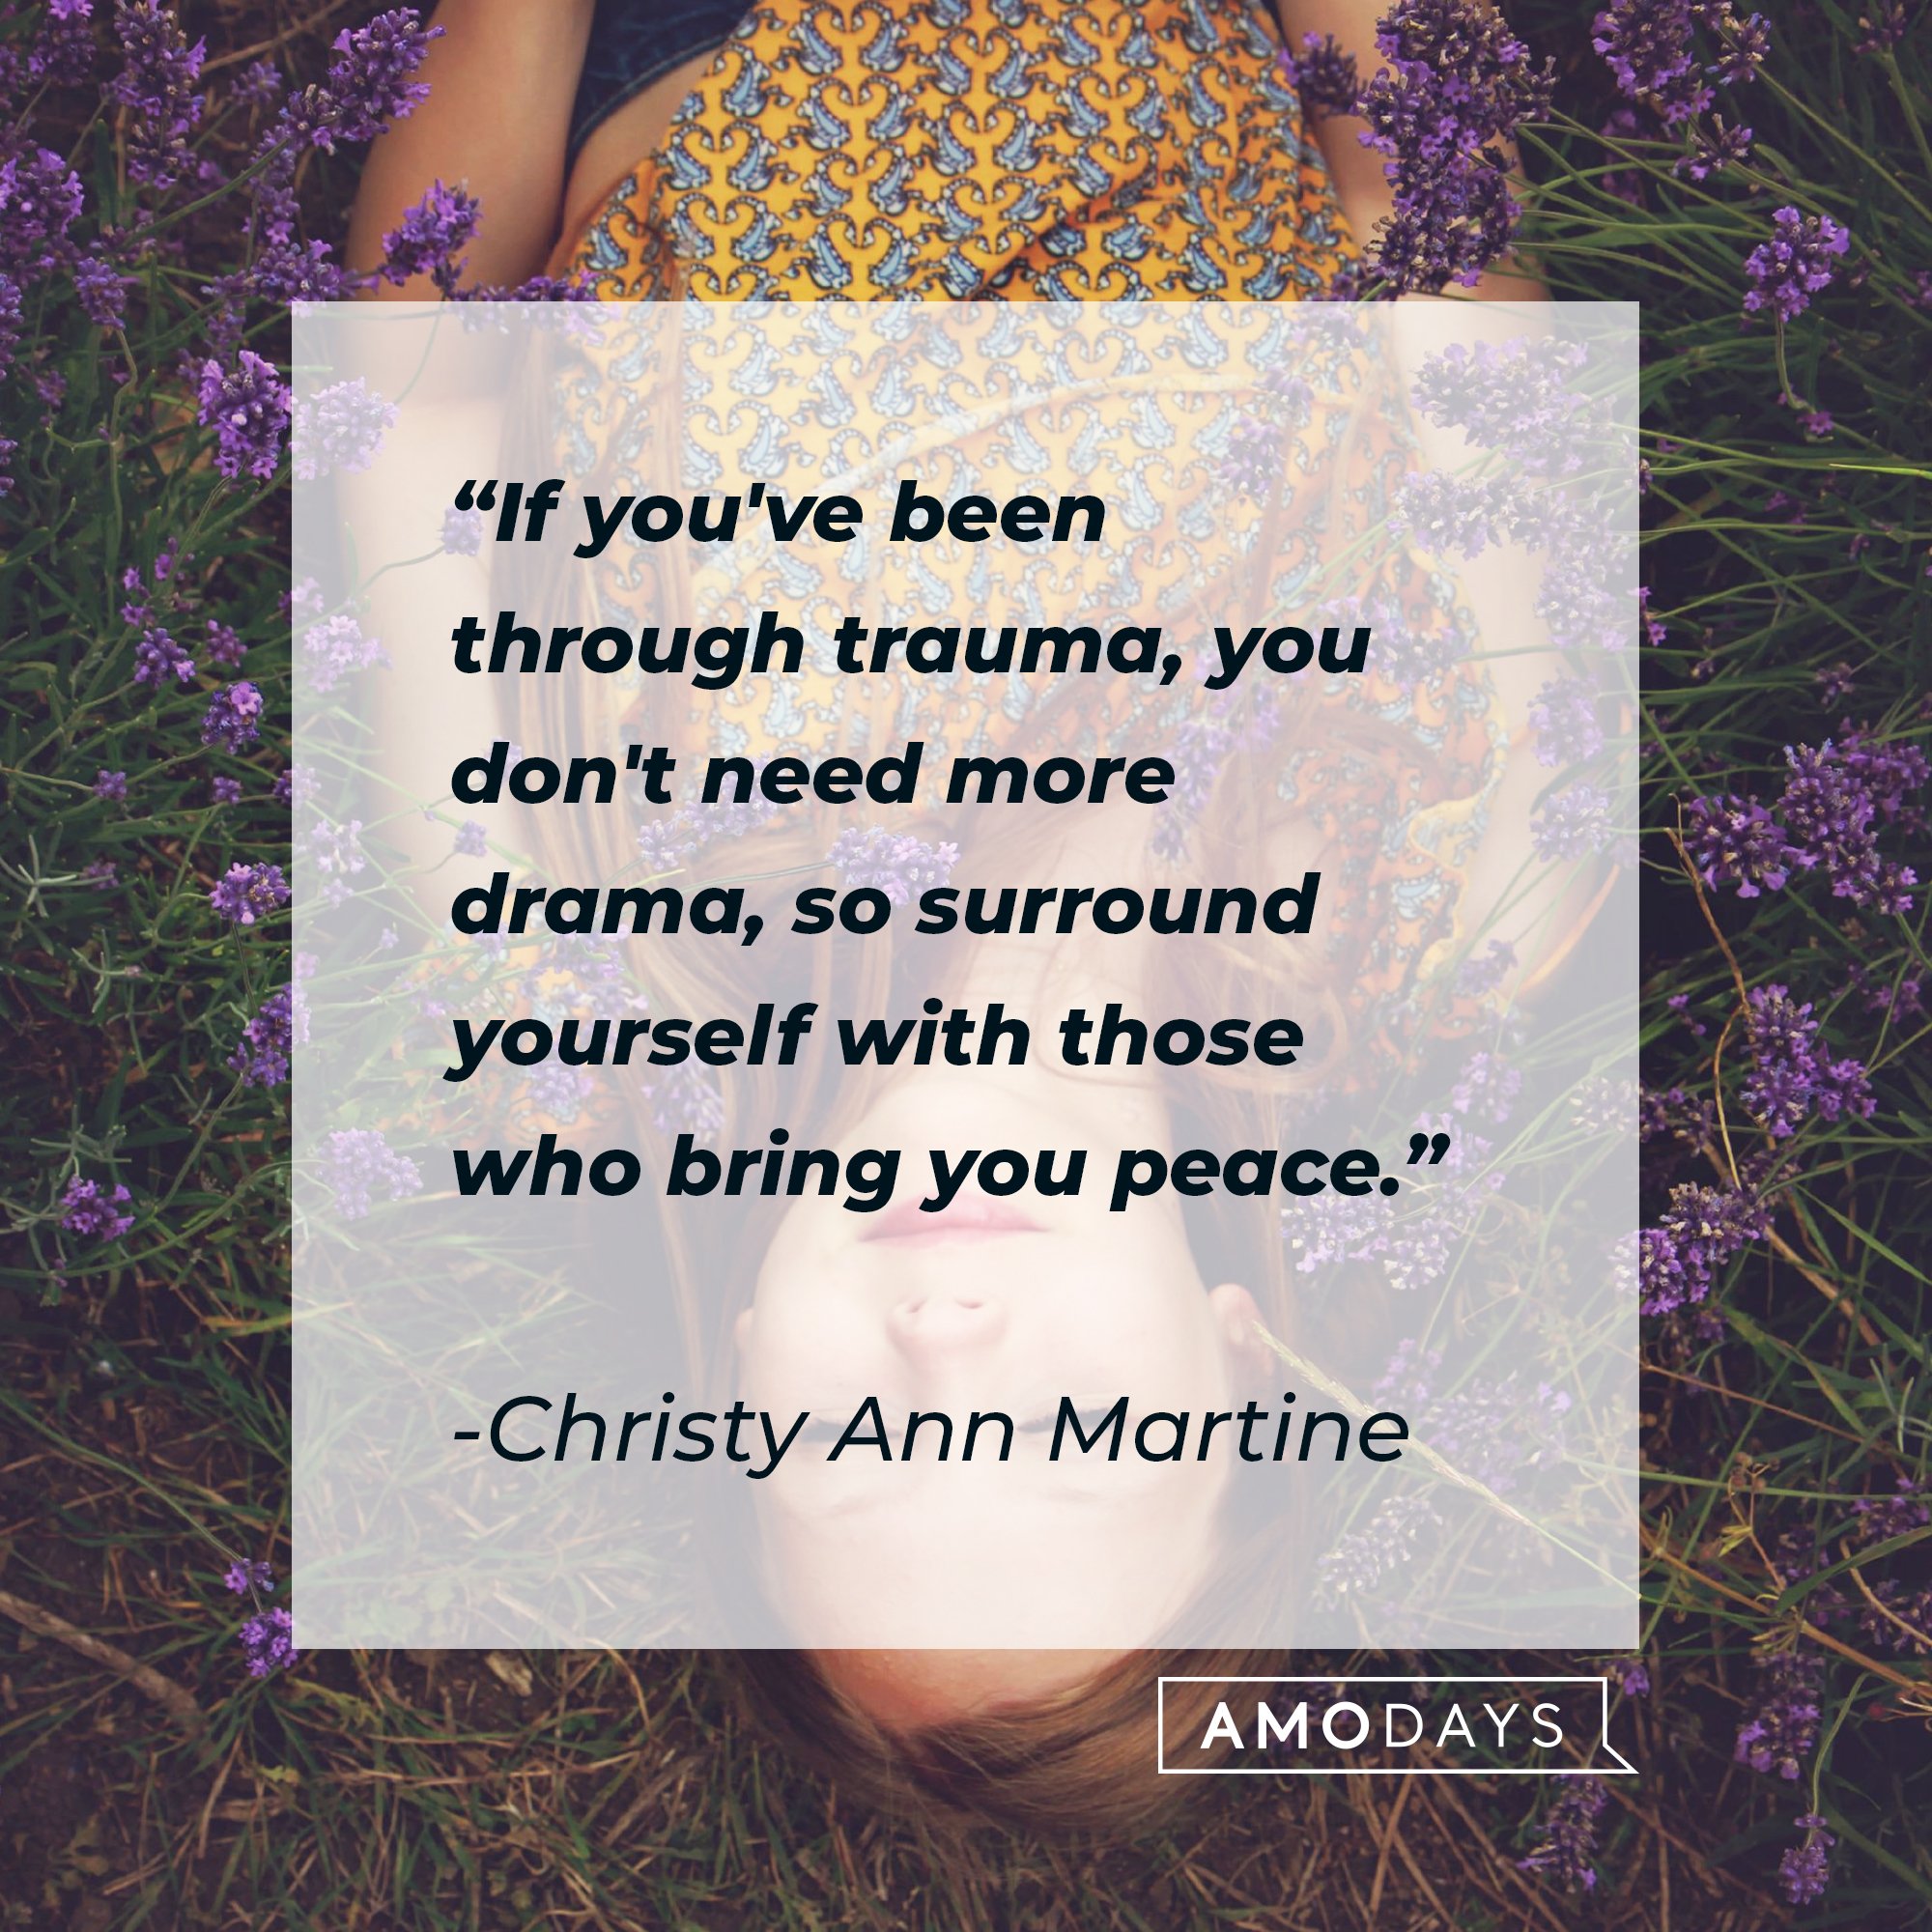 Christy Ann Martine’s quote: "If you've been through trauma, you don't need more drama, so surround yourself with those who bring you peace." | Image: AmoDays